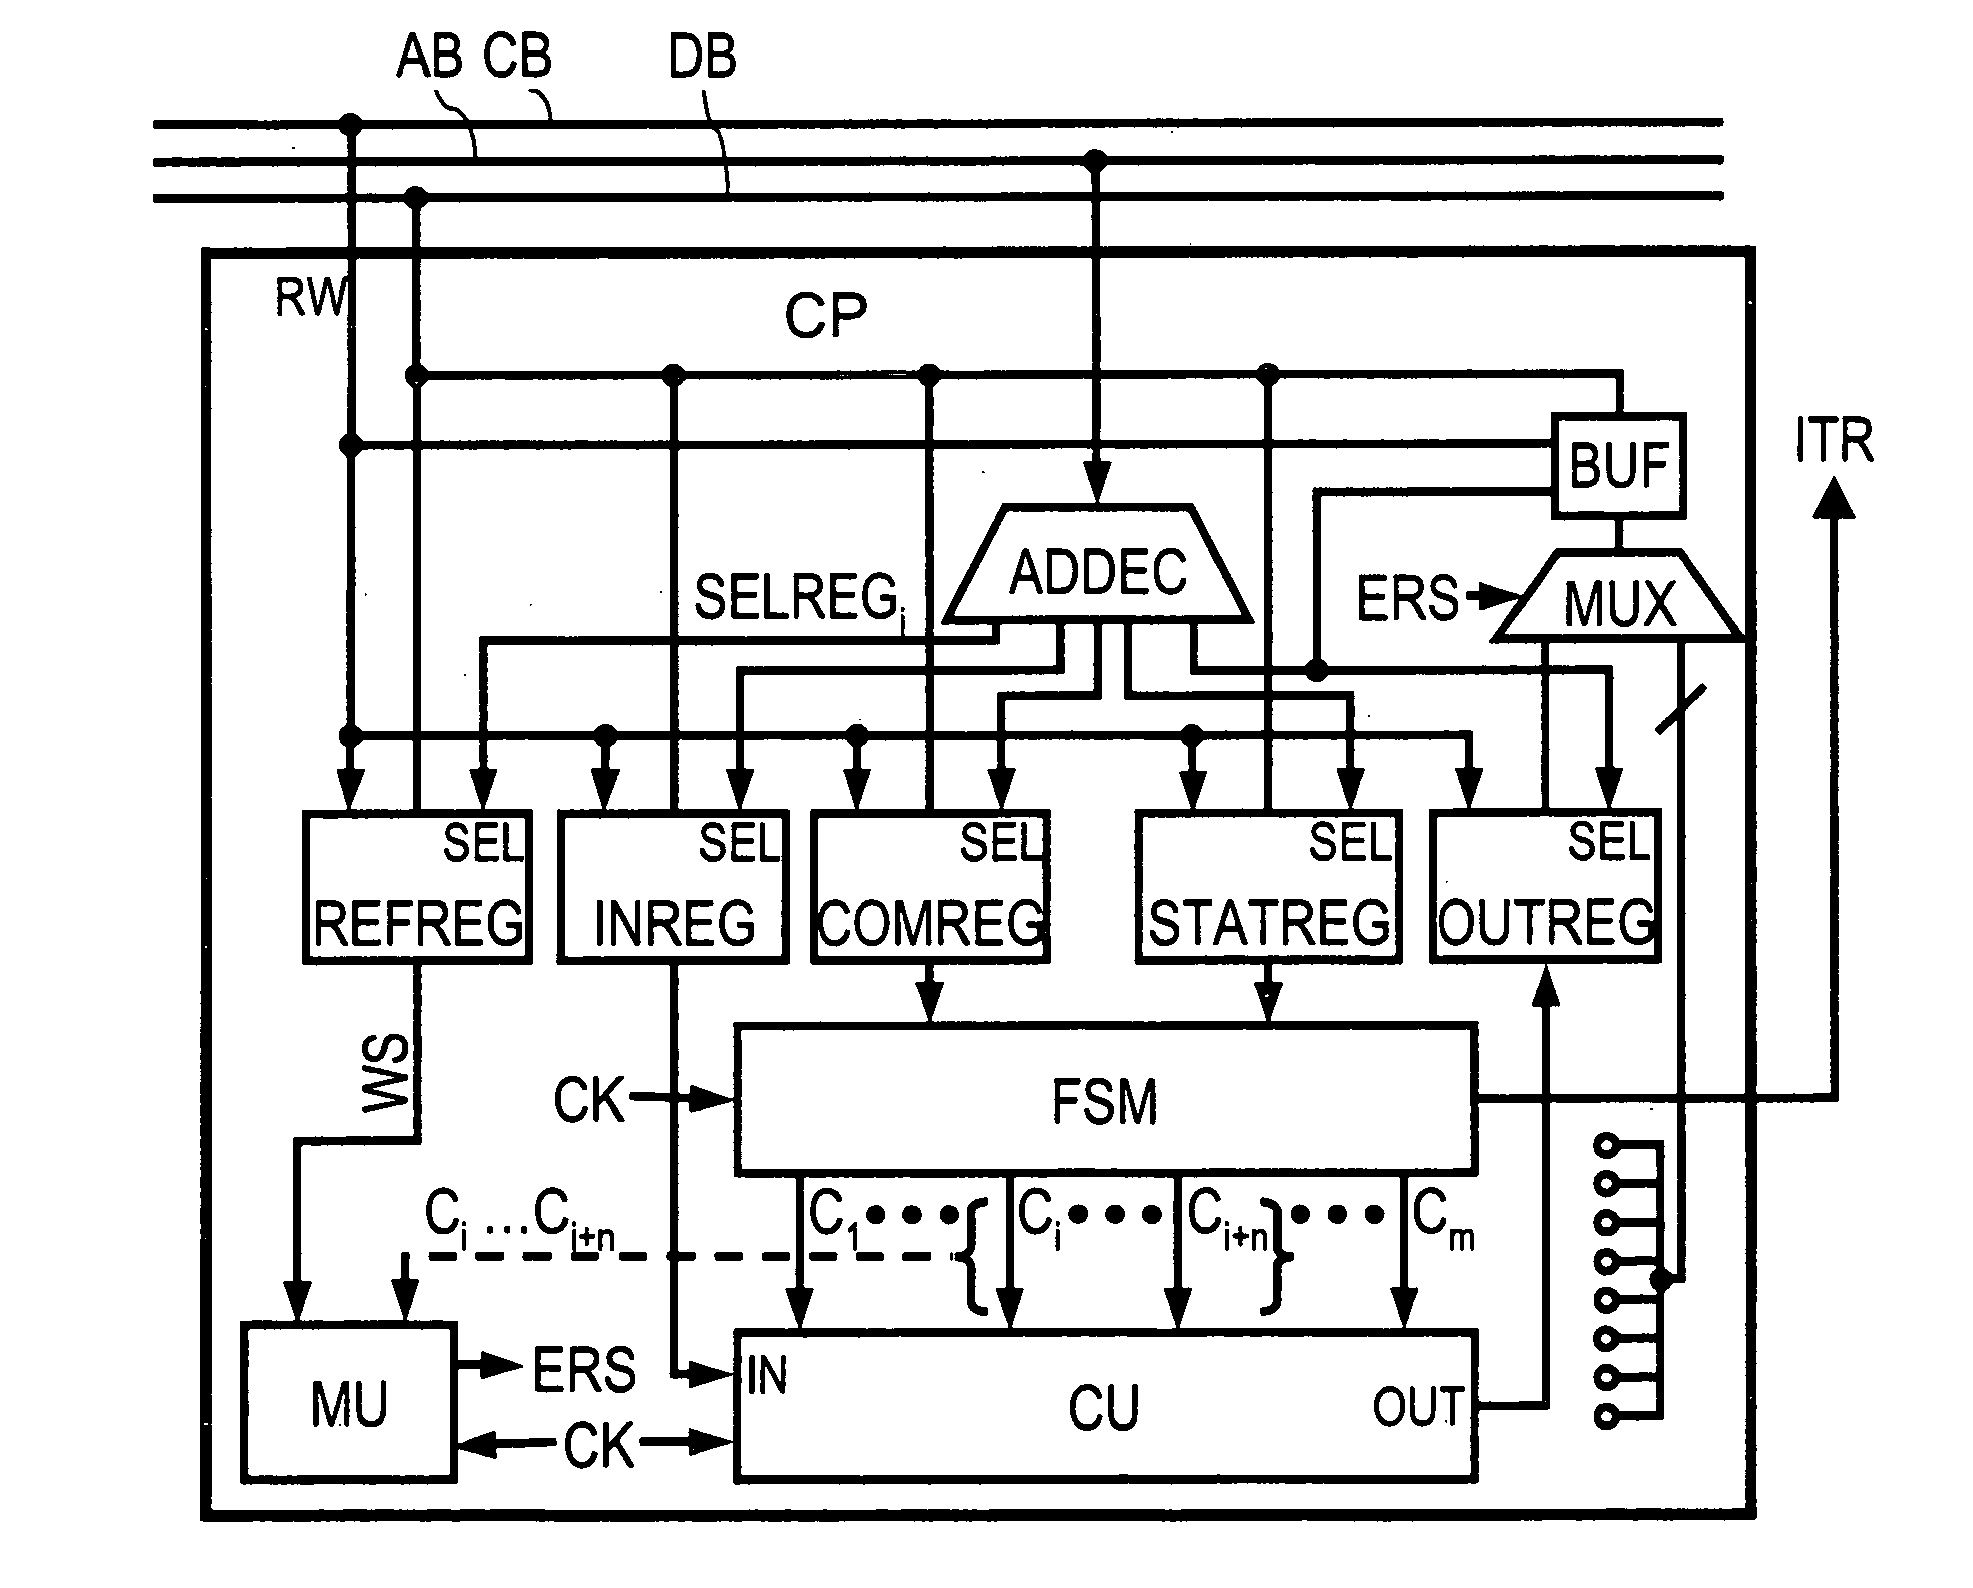 Secured coprocessor comprising means for preventing access to a unit of the coprocessor